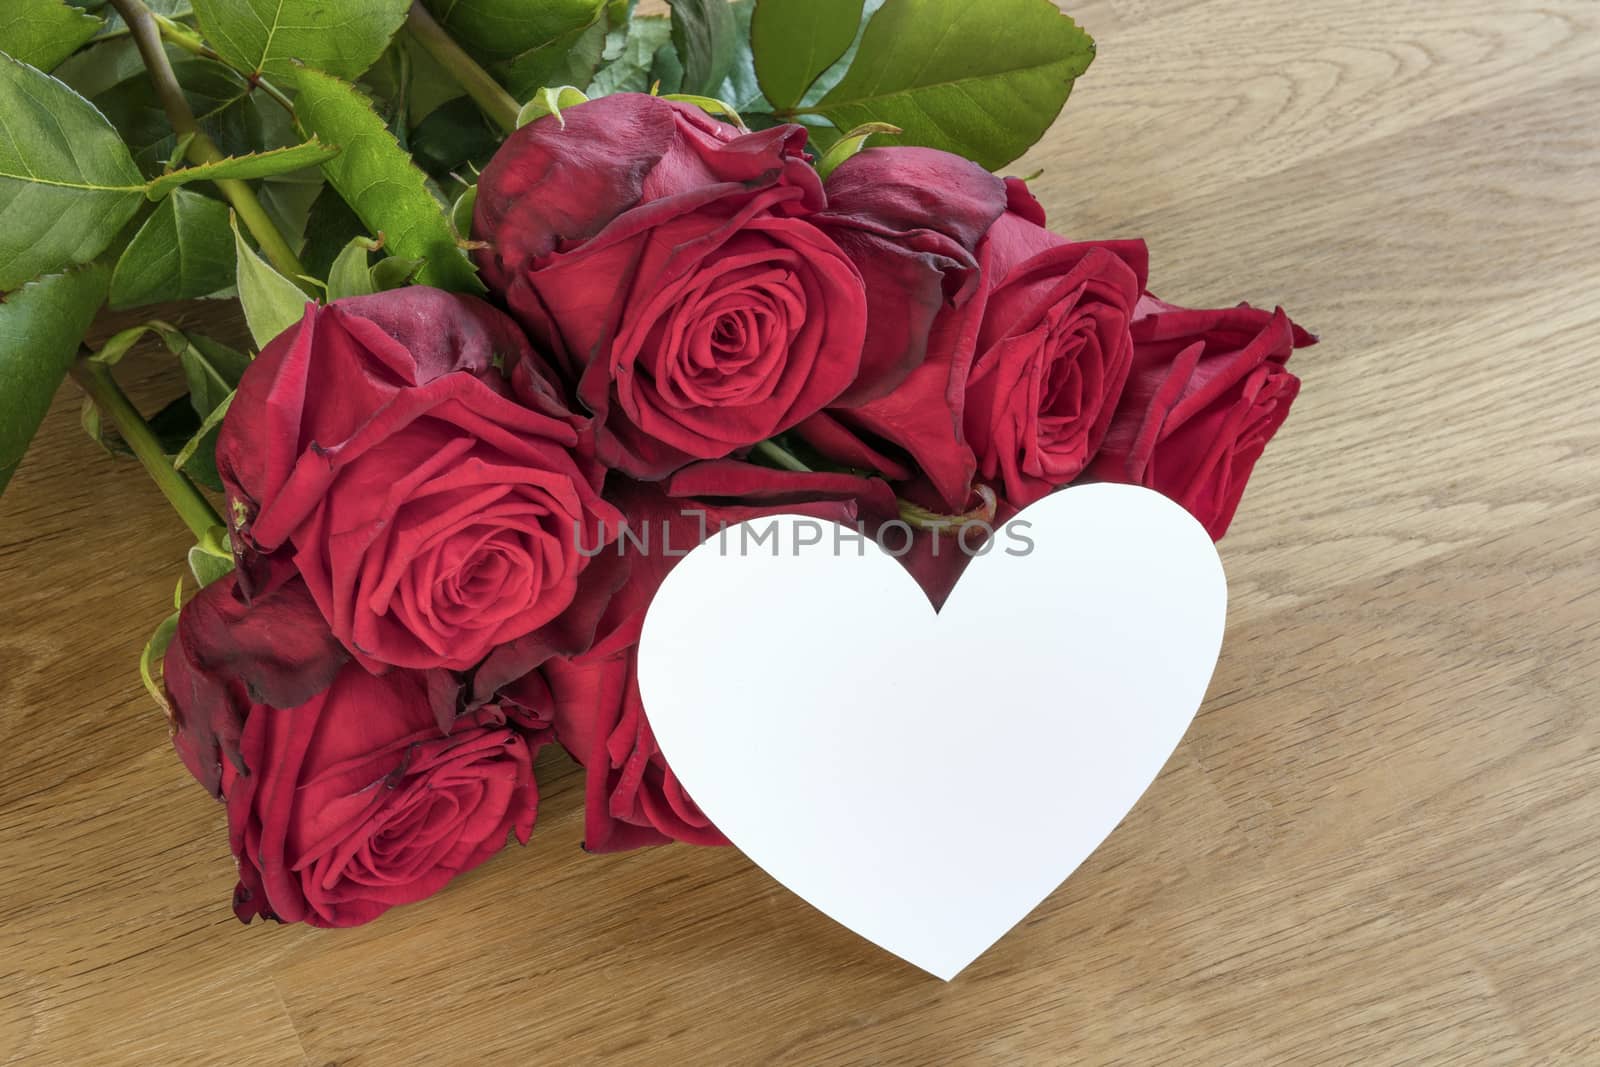 Red roses on a wooden table with white heart